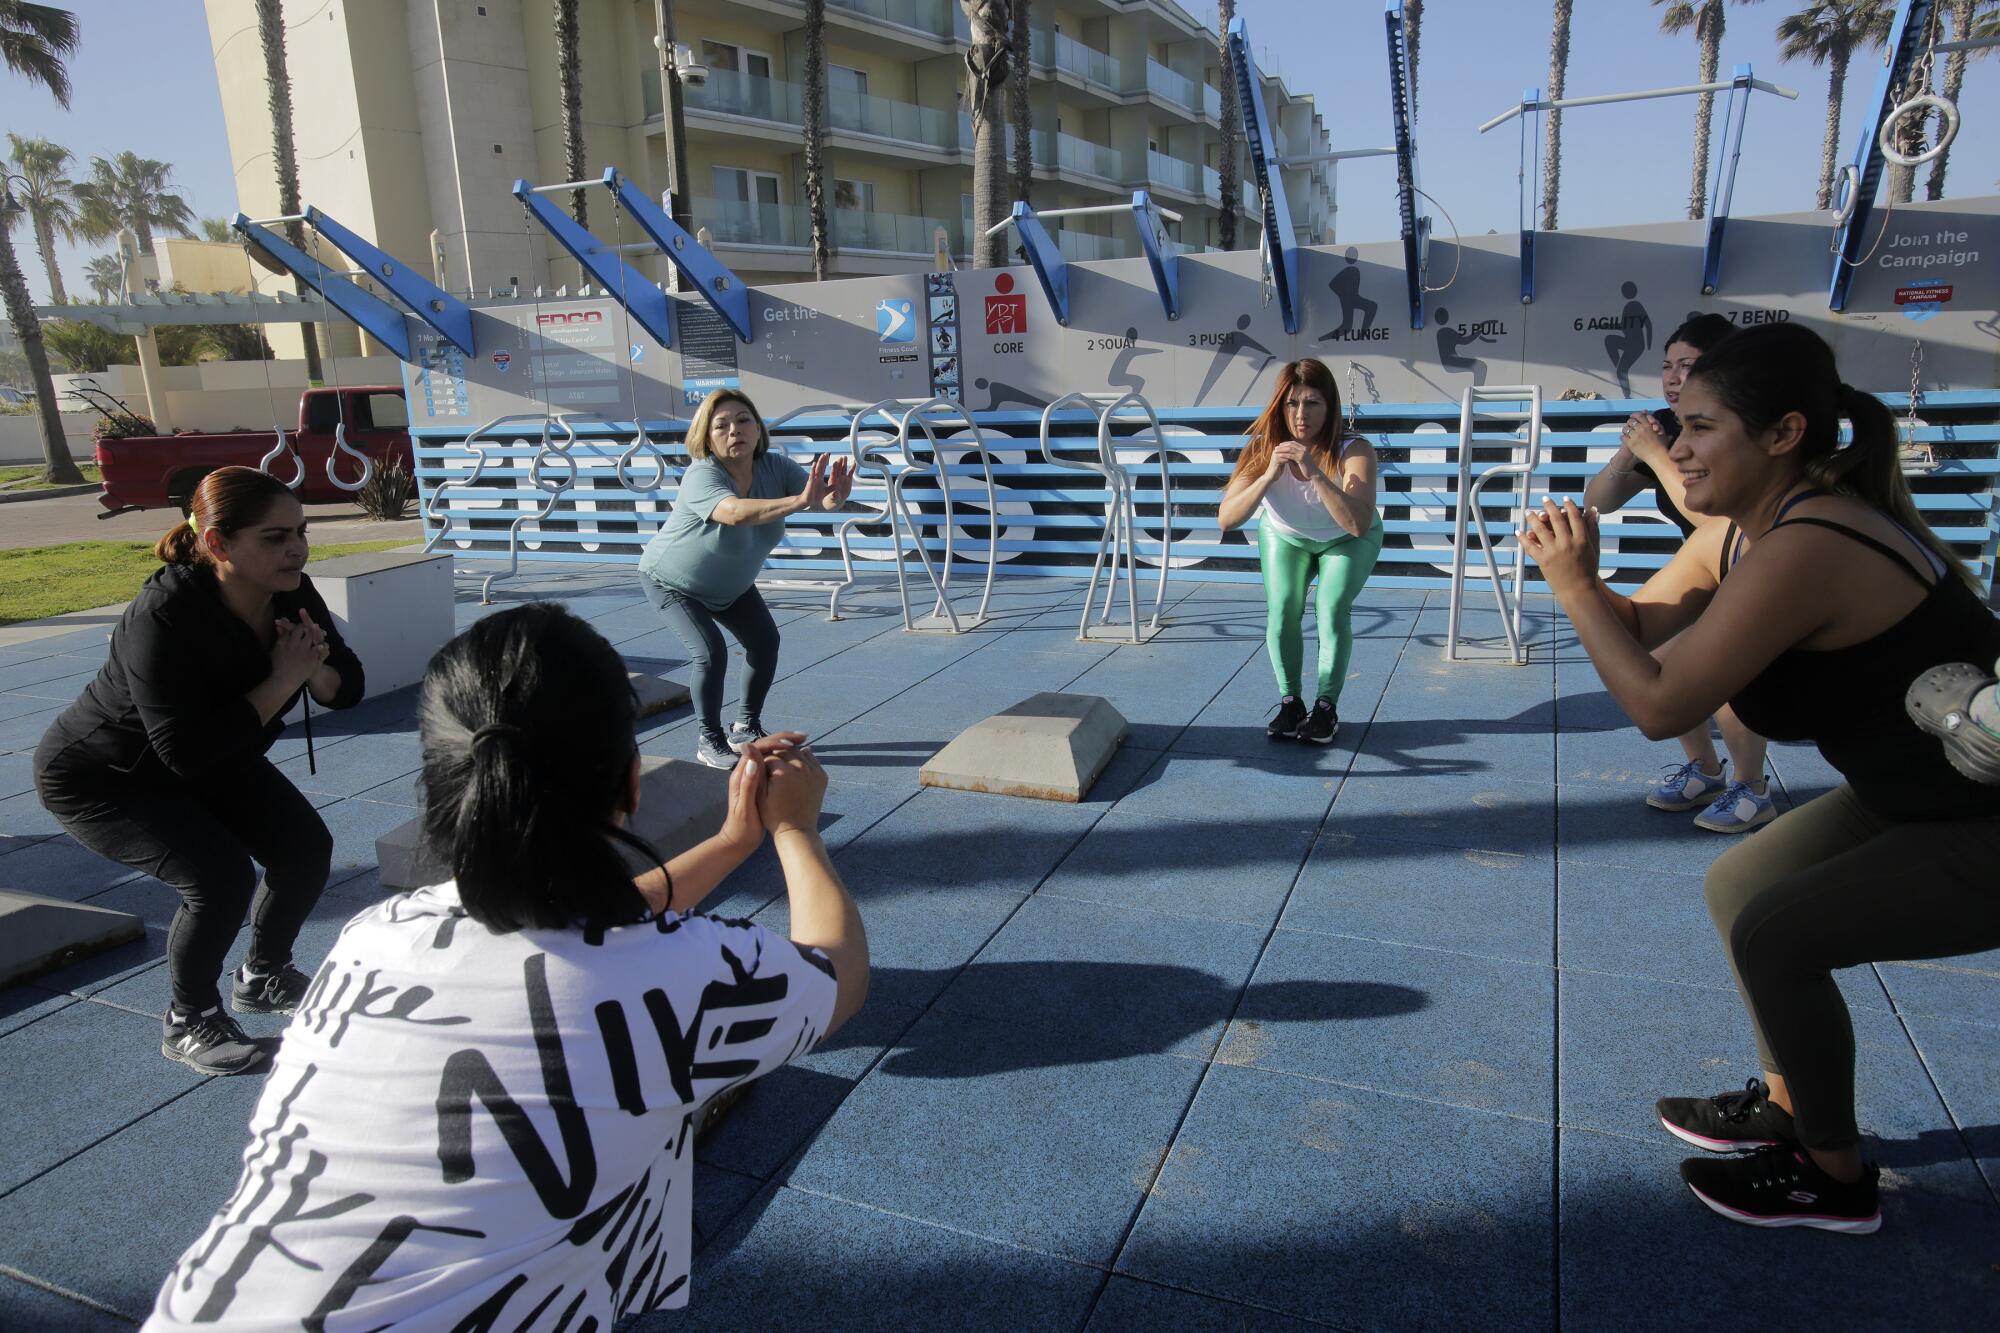 A group of women from the Herbal Life community workout group exercise at Dunes Park on Thursday, March 17, 2022